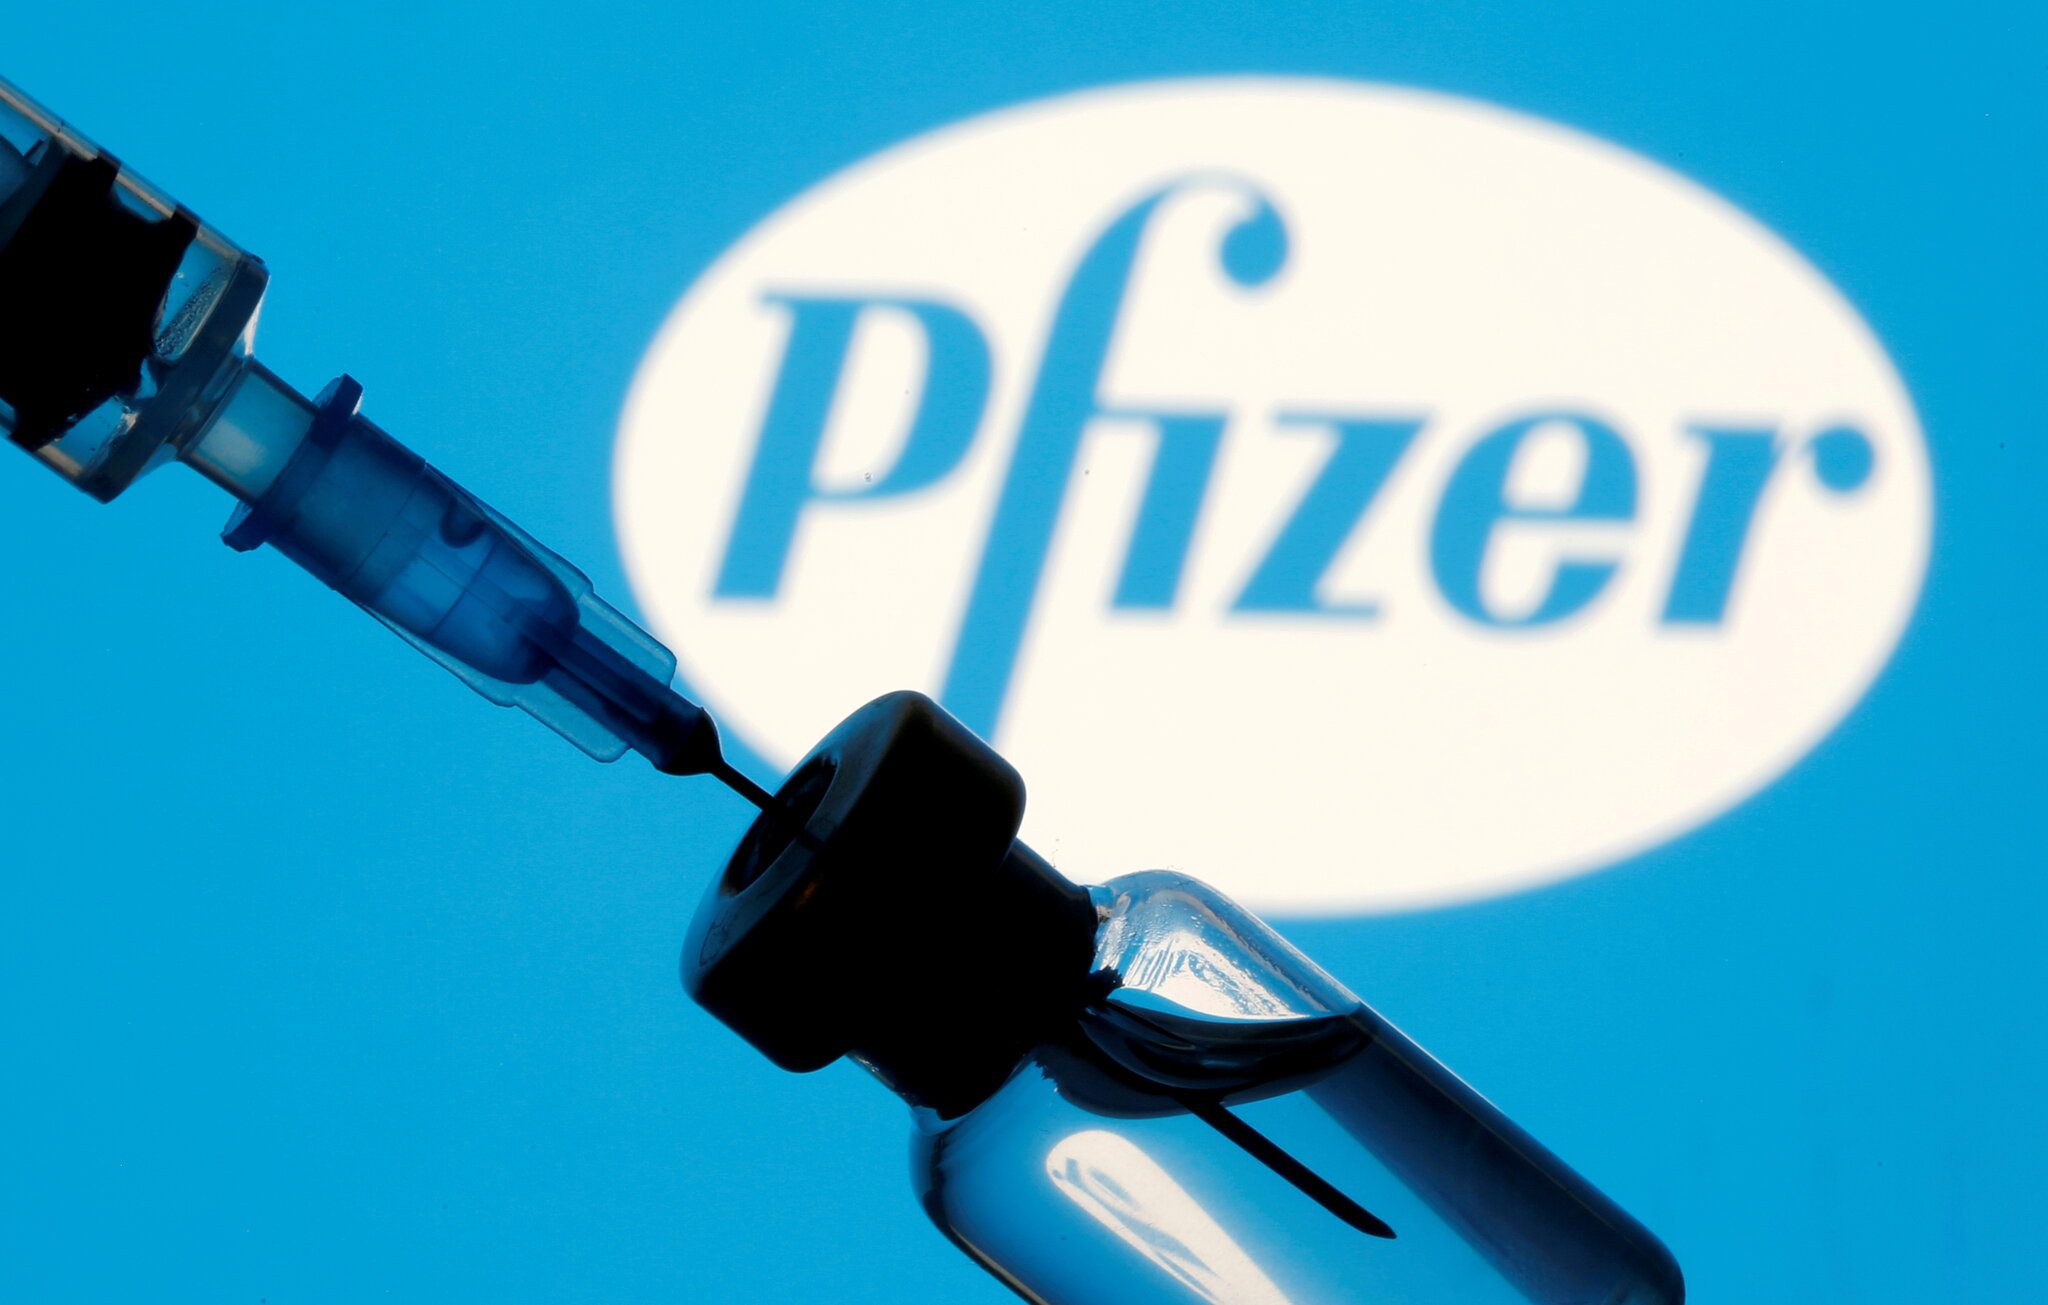 Pfizer Sells Thane Land to Zoetis Pharma for Rs. 264 Crore